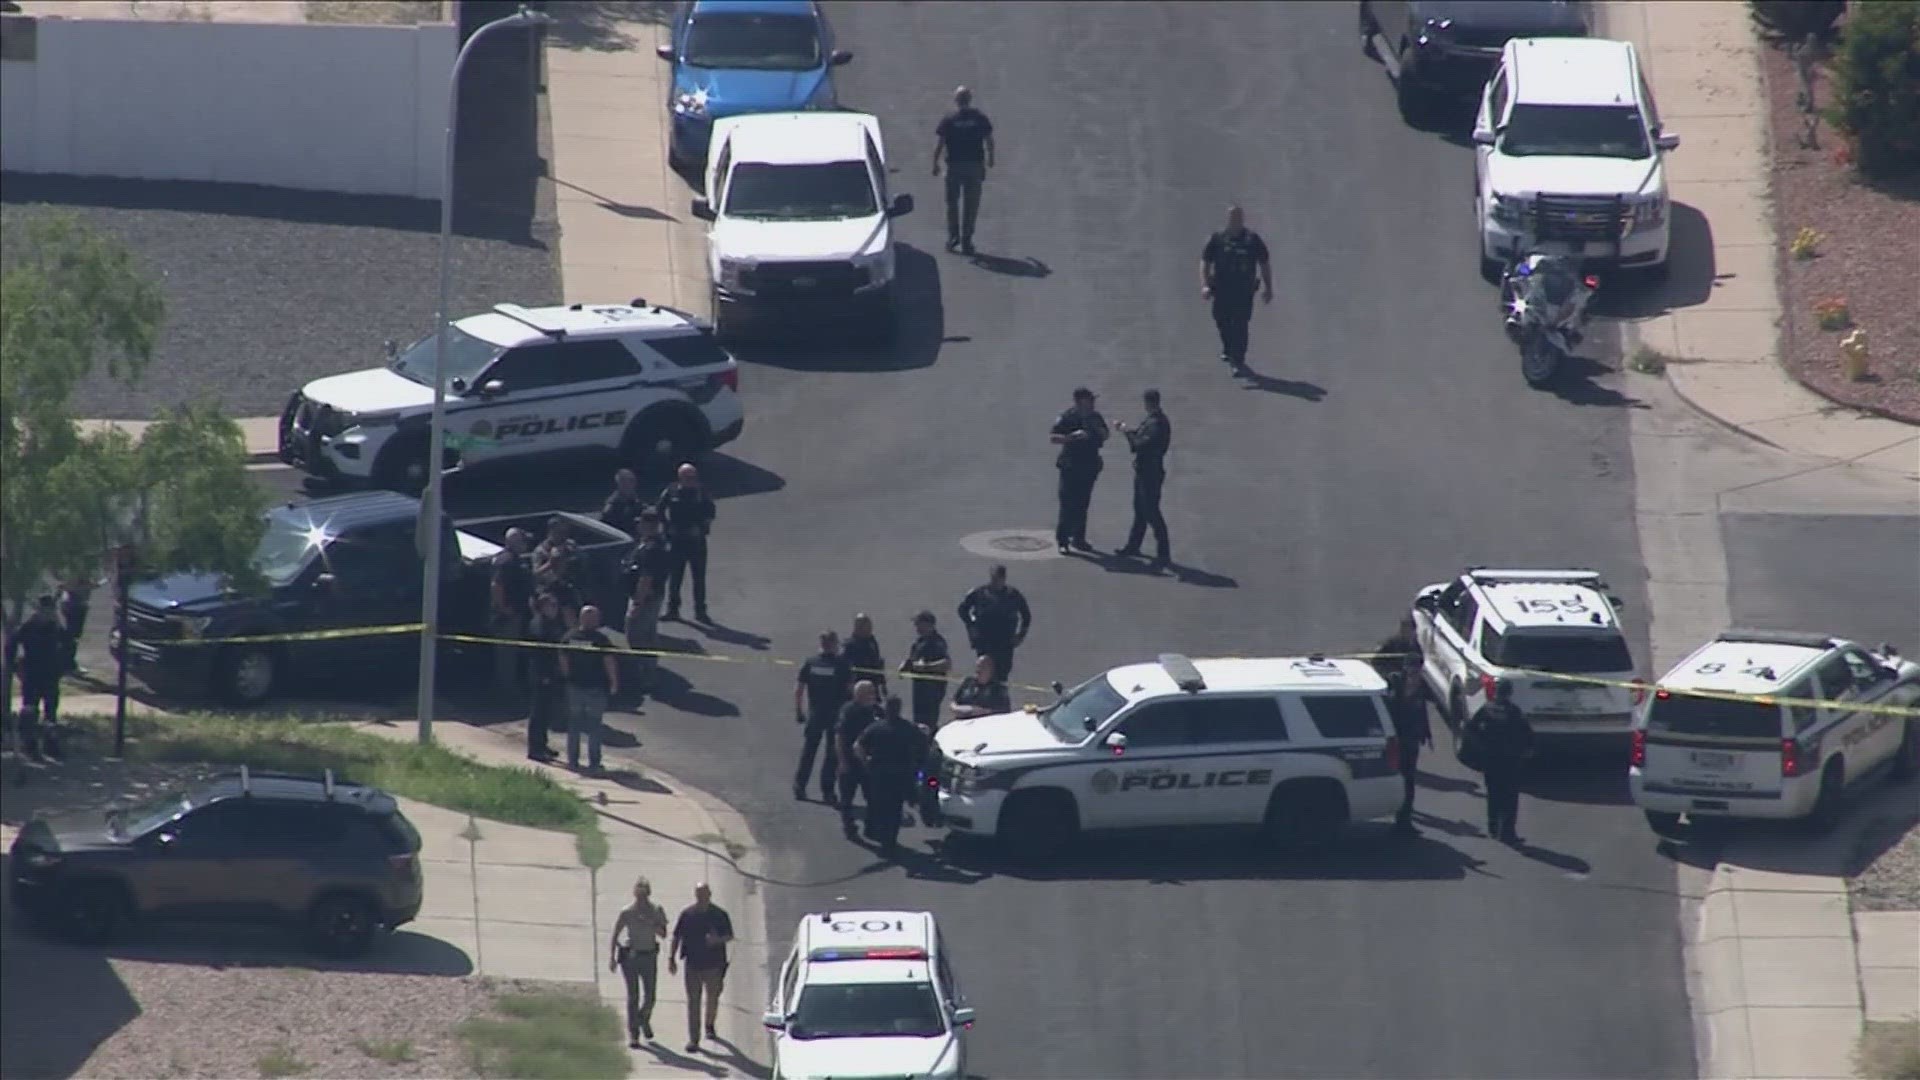 The shooting occurred near 67th Avenue and Cactus Road at around 2 p.m. A suspect was shot at least one time.